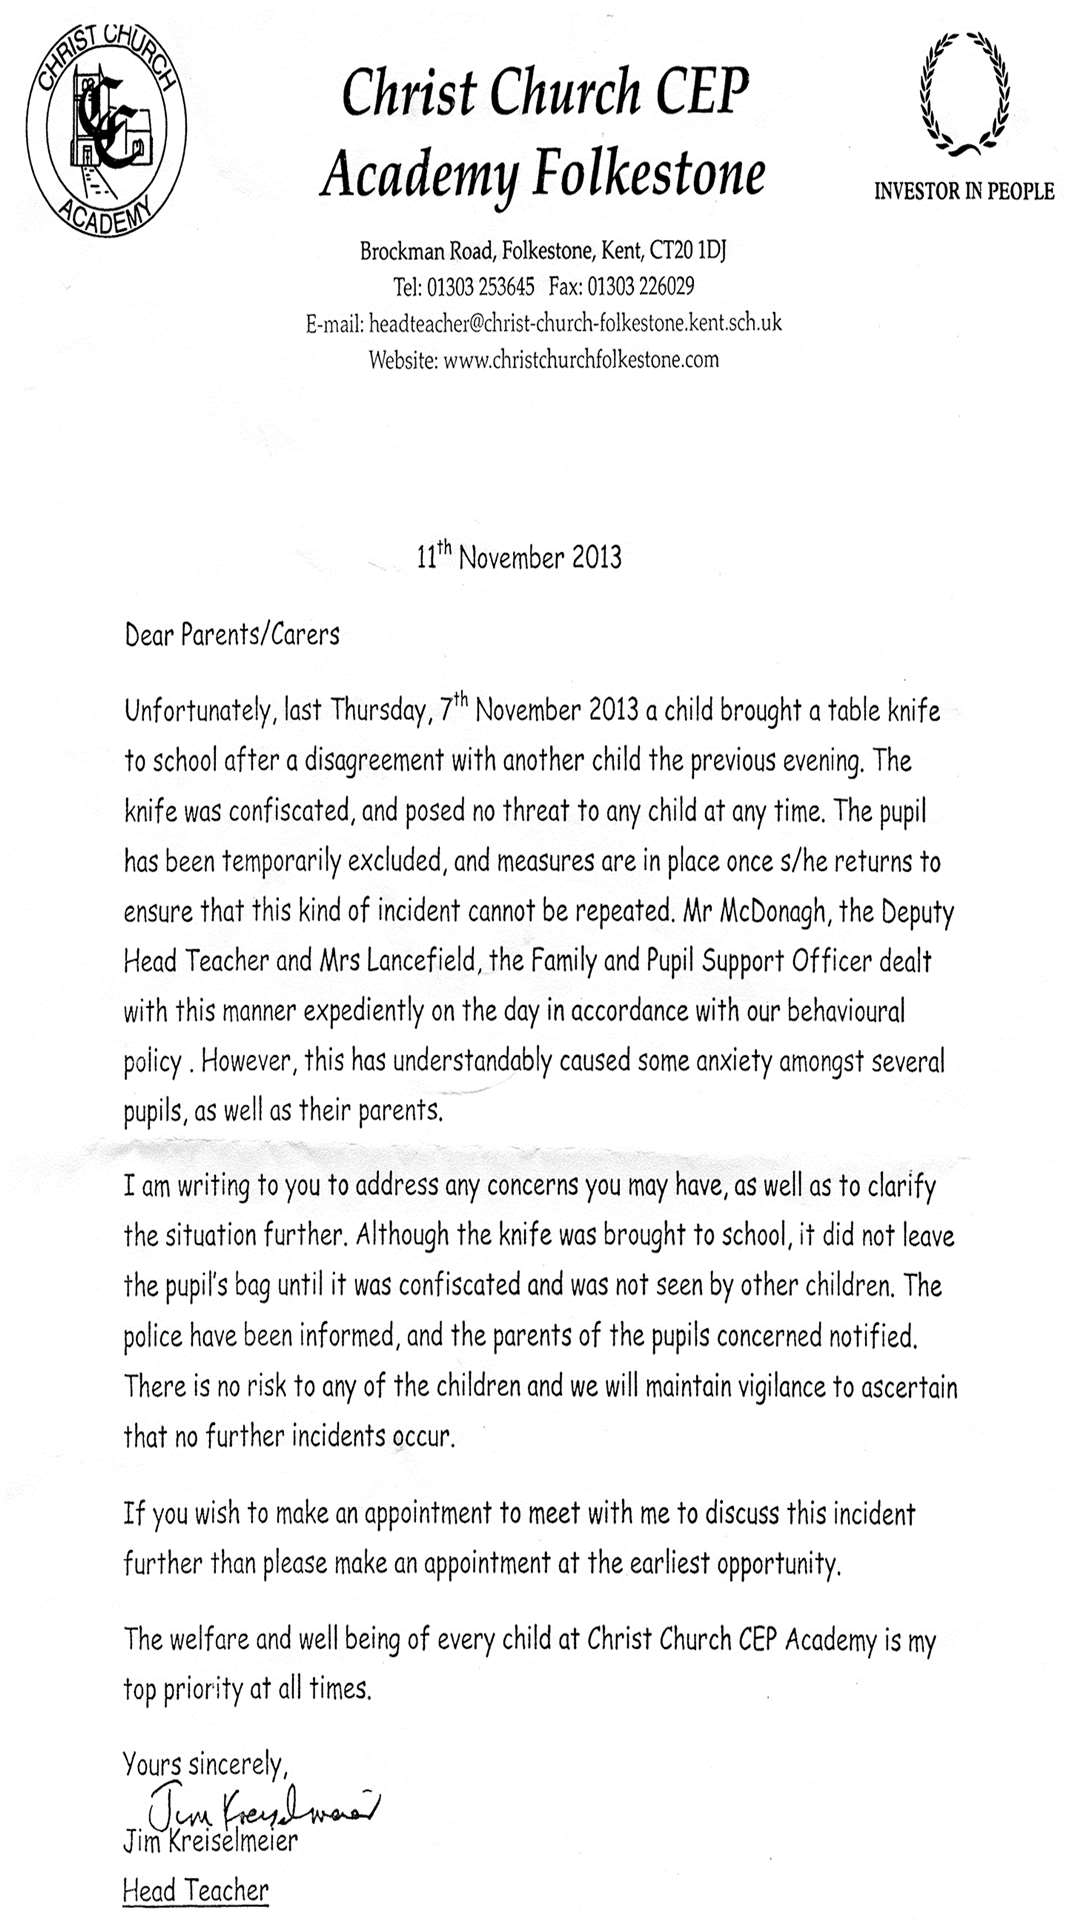 The letter sent to parents and carers reassuring them about children's safety